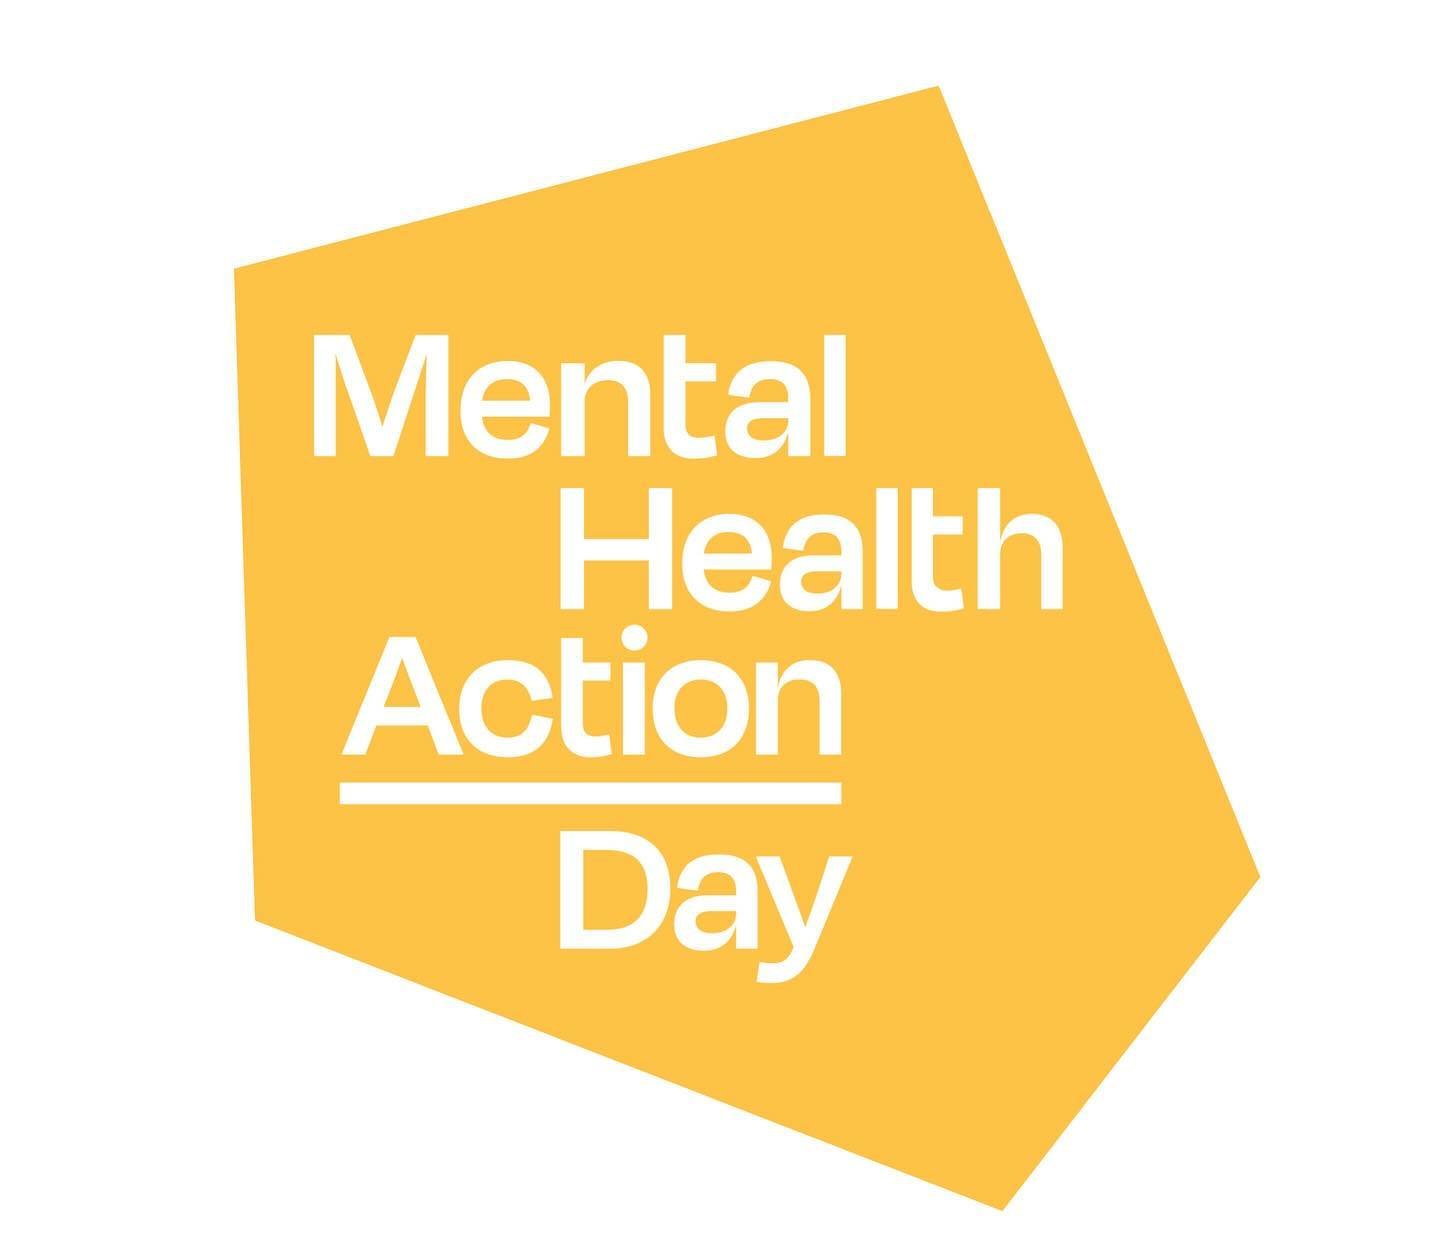 Today is Mental Health Action Day. Prioritize your mental health and take an action that feels most helpful for you. Some suggestions include connecting with friends and/or family, engaging in a mindful awareness activity such as meditation or yoga, 